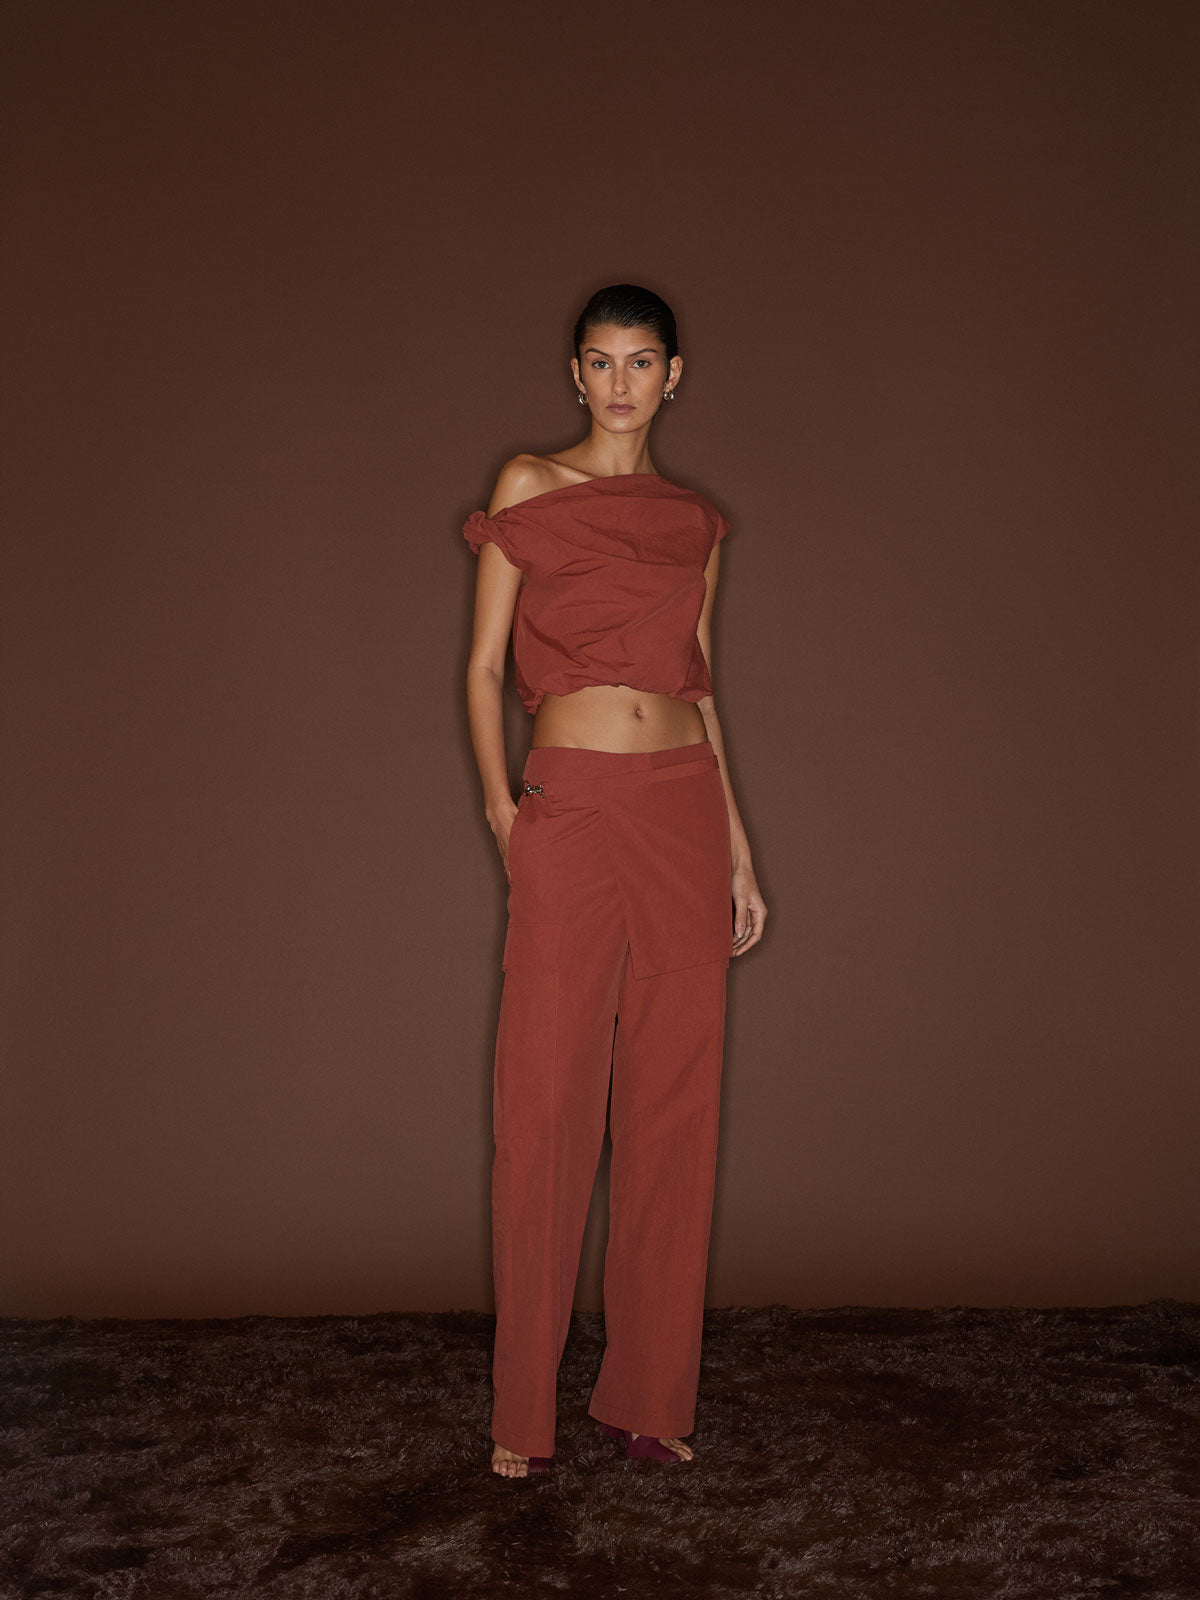 A female figure wearing the Spice 09 Alice Top and pants against a dark brown background